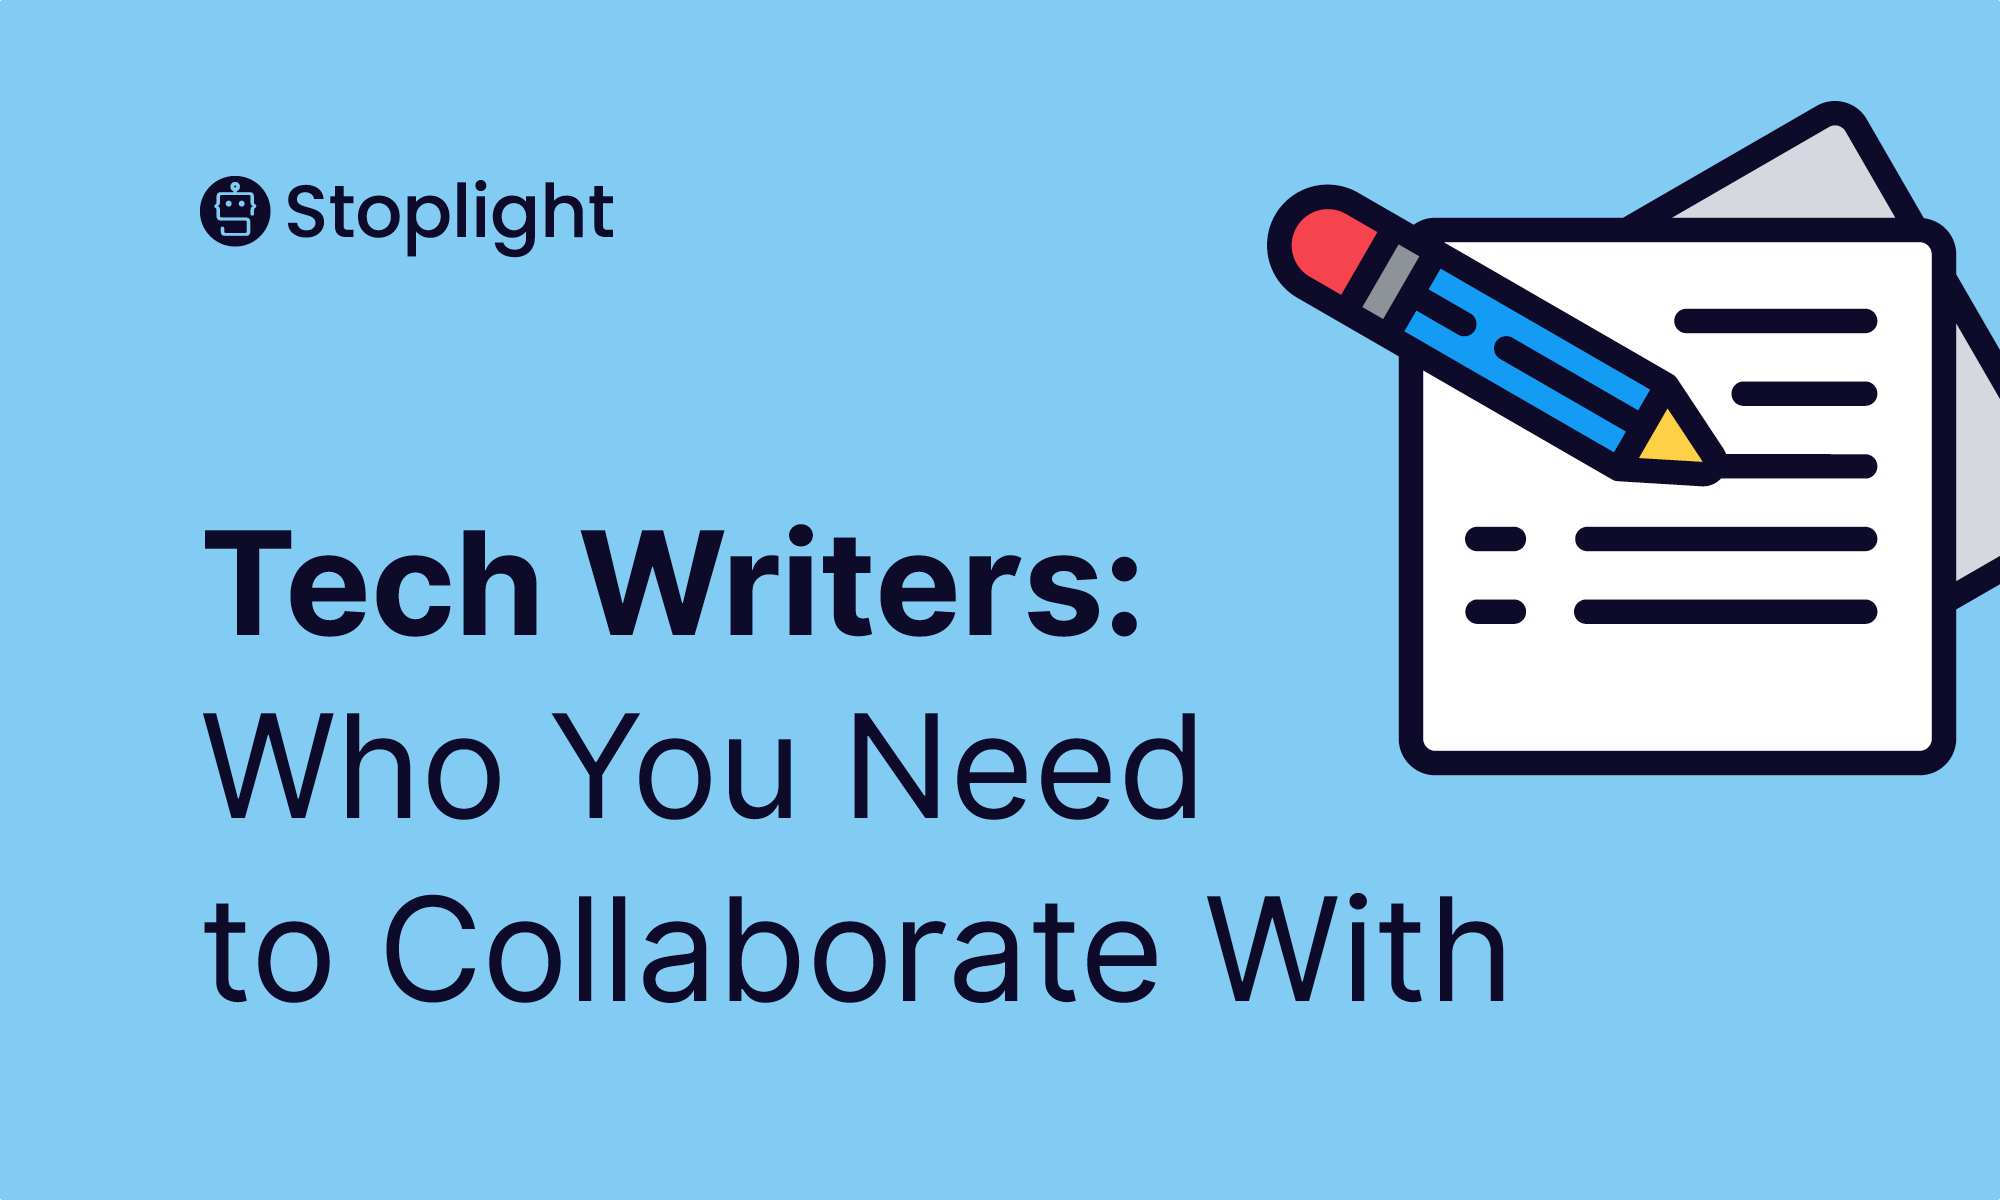 Tech Writers: Who You Need to Collaborate With